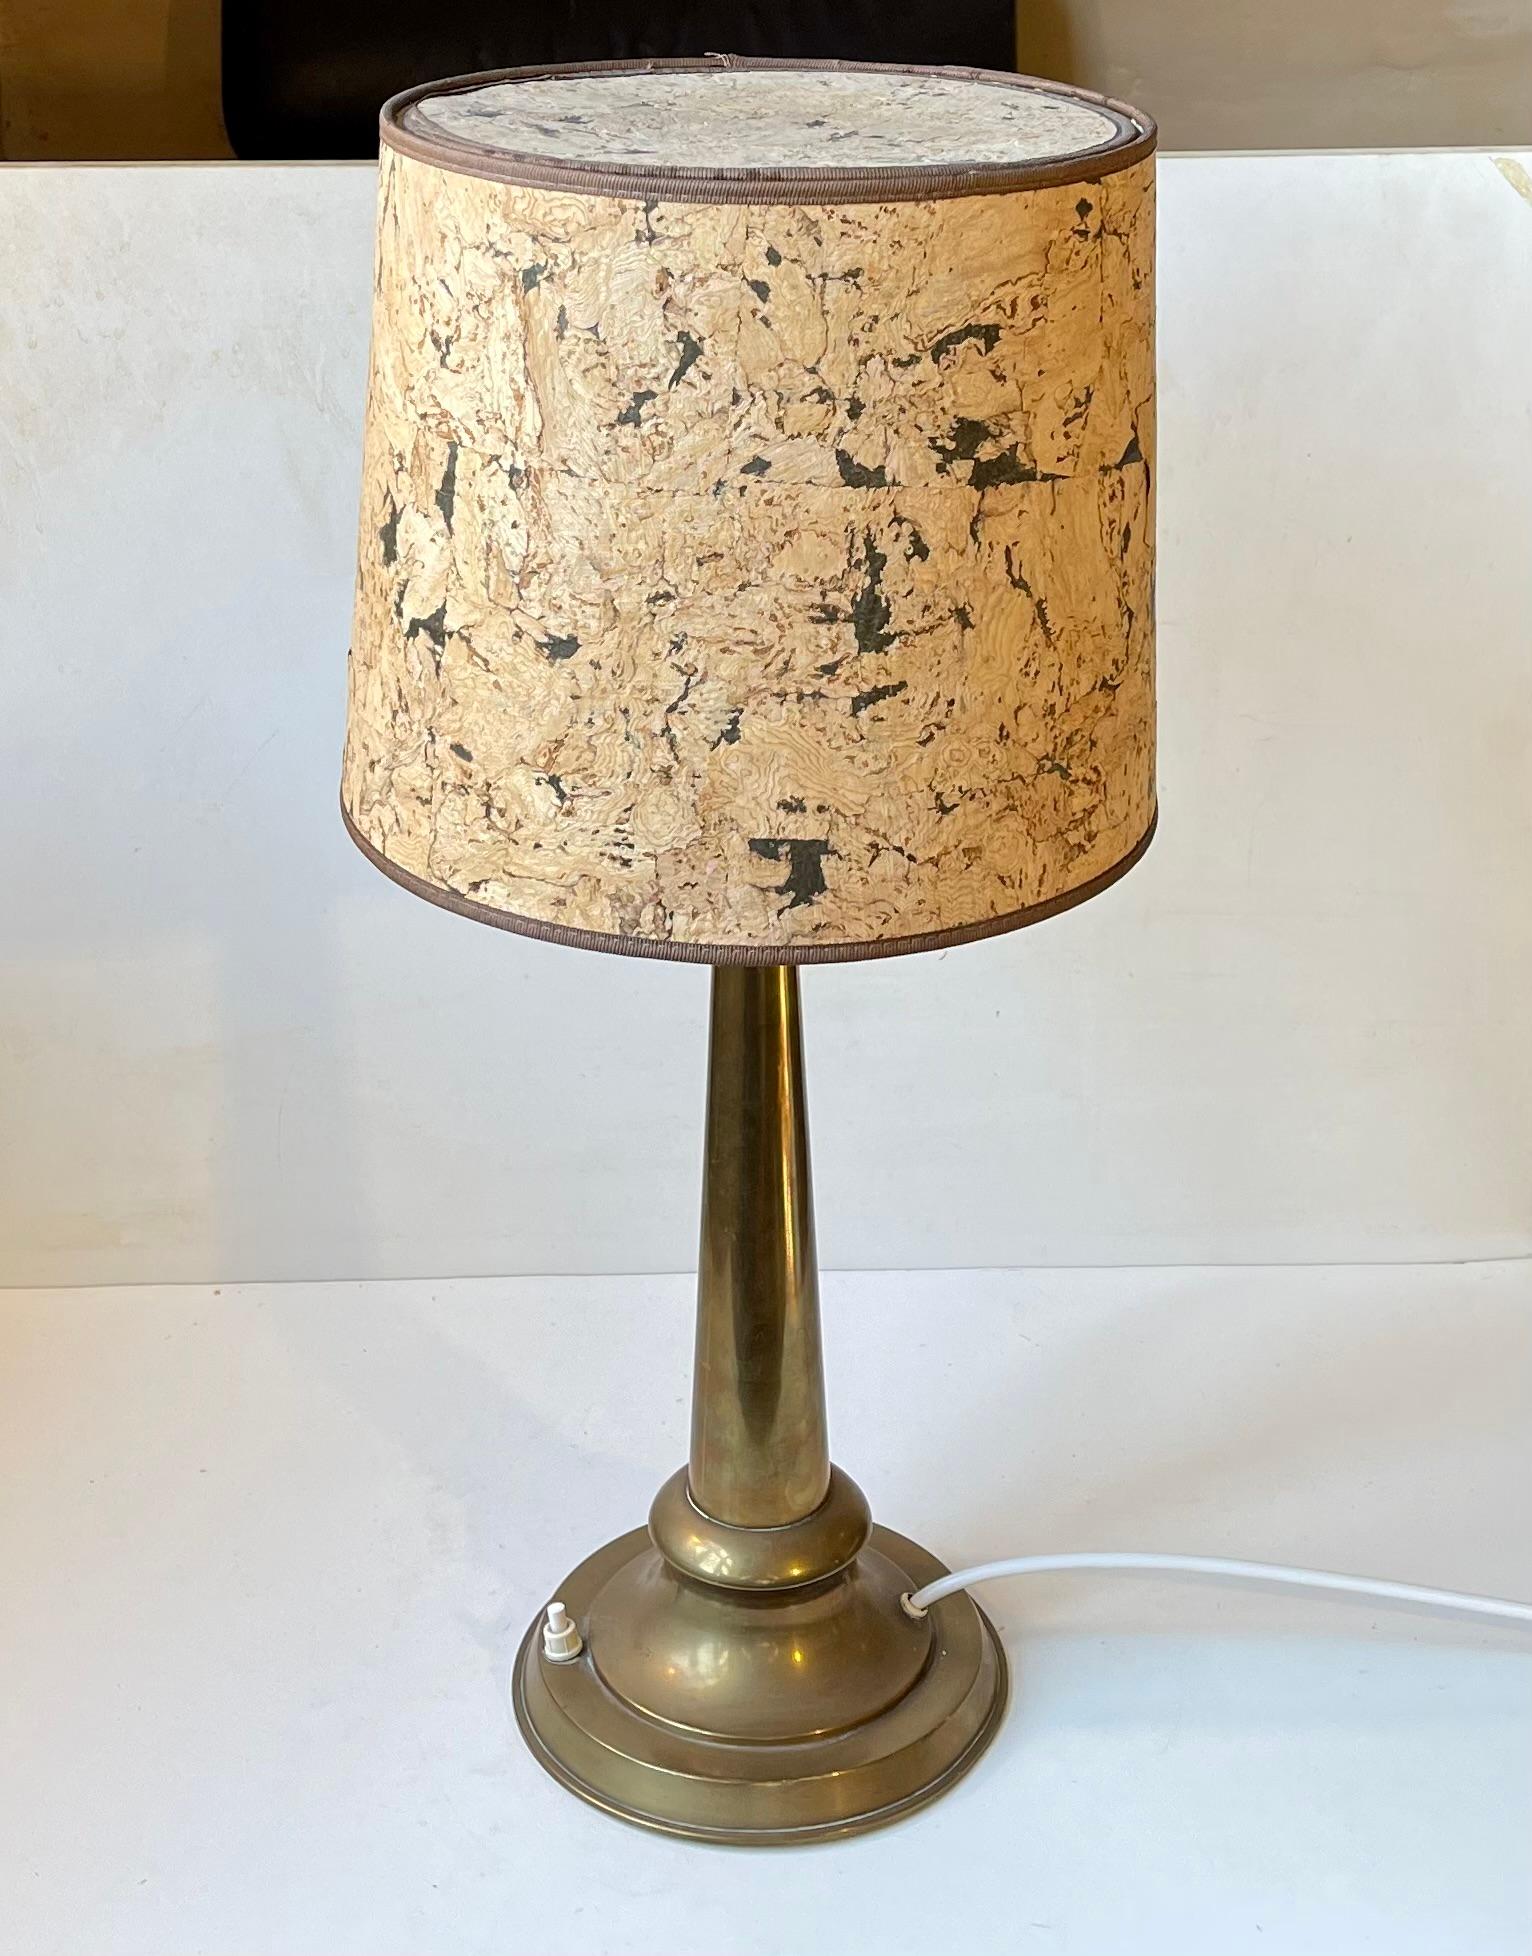 A column shaped brasss table light featuring a handmade cork shade. A very rare vintage shade configuration. Its a large desk or table lamp with a height of 57 cm and featuring an on/of switch to its base. Measurements: Diameter: 27/14 cm